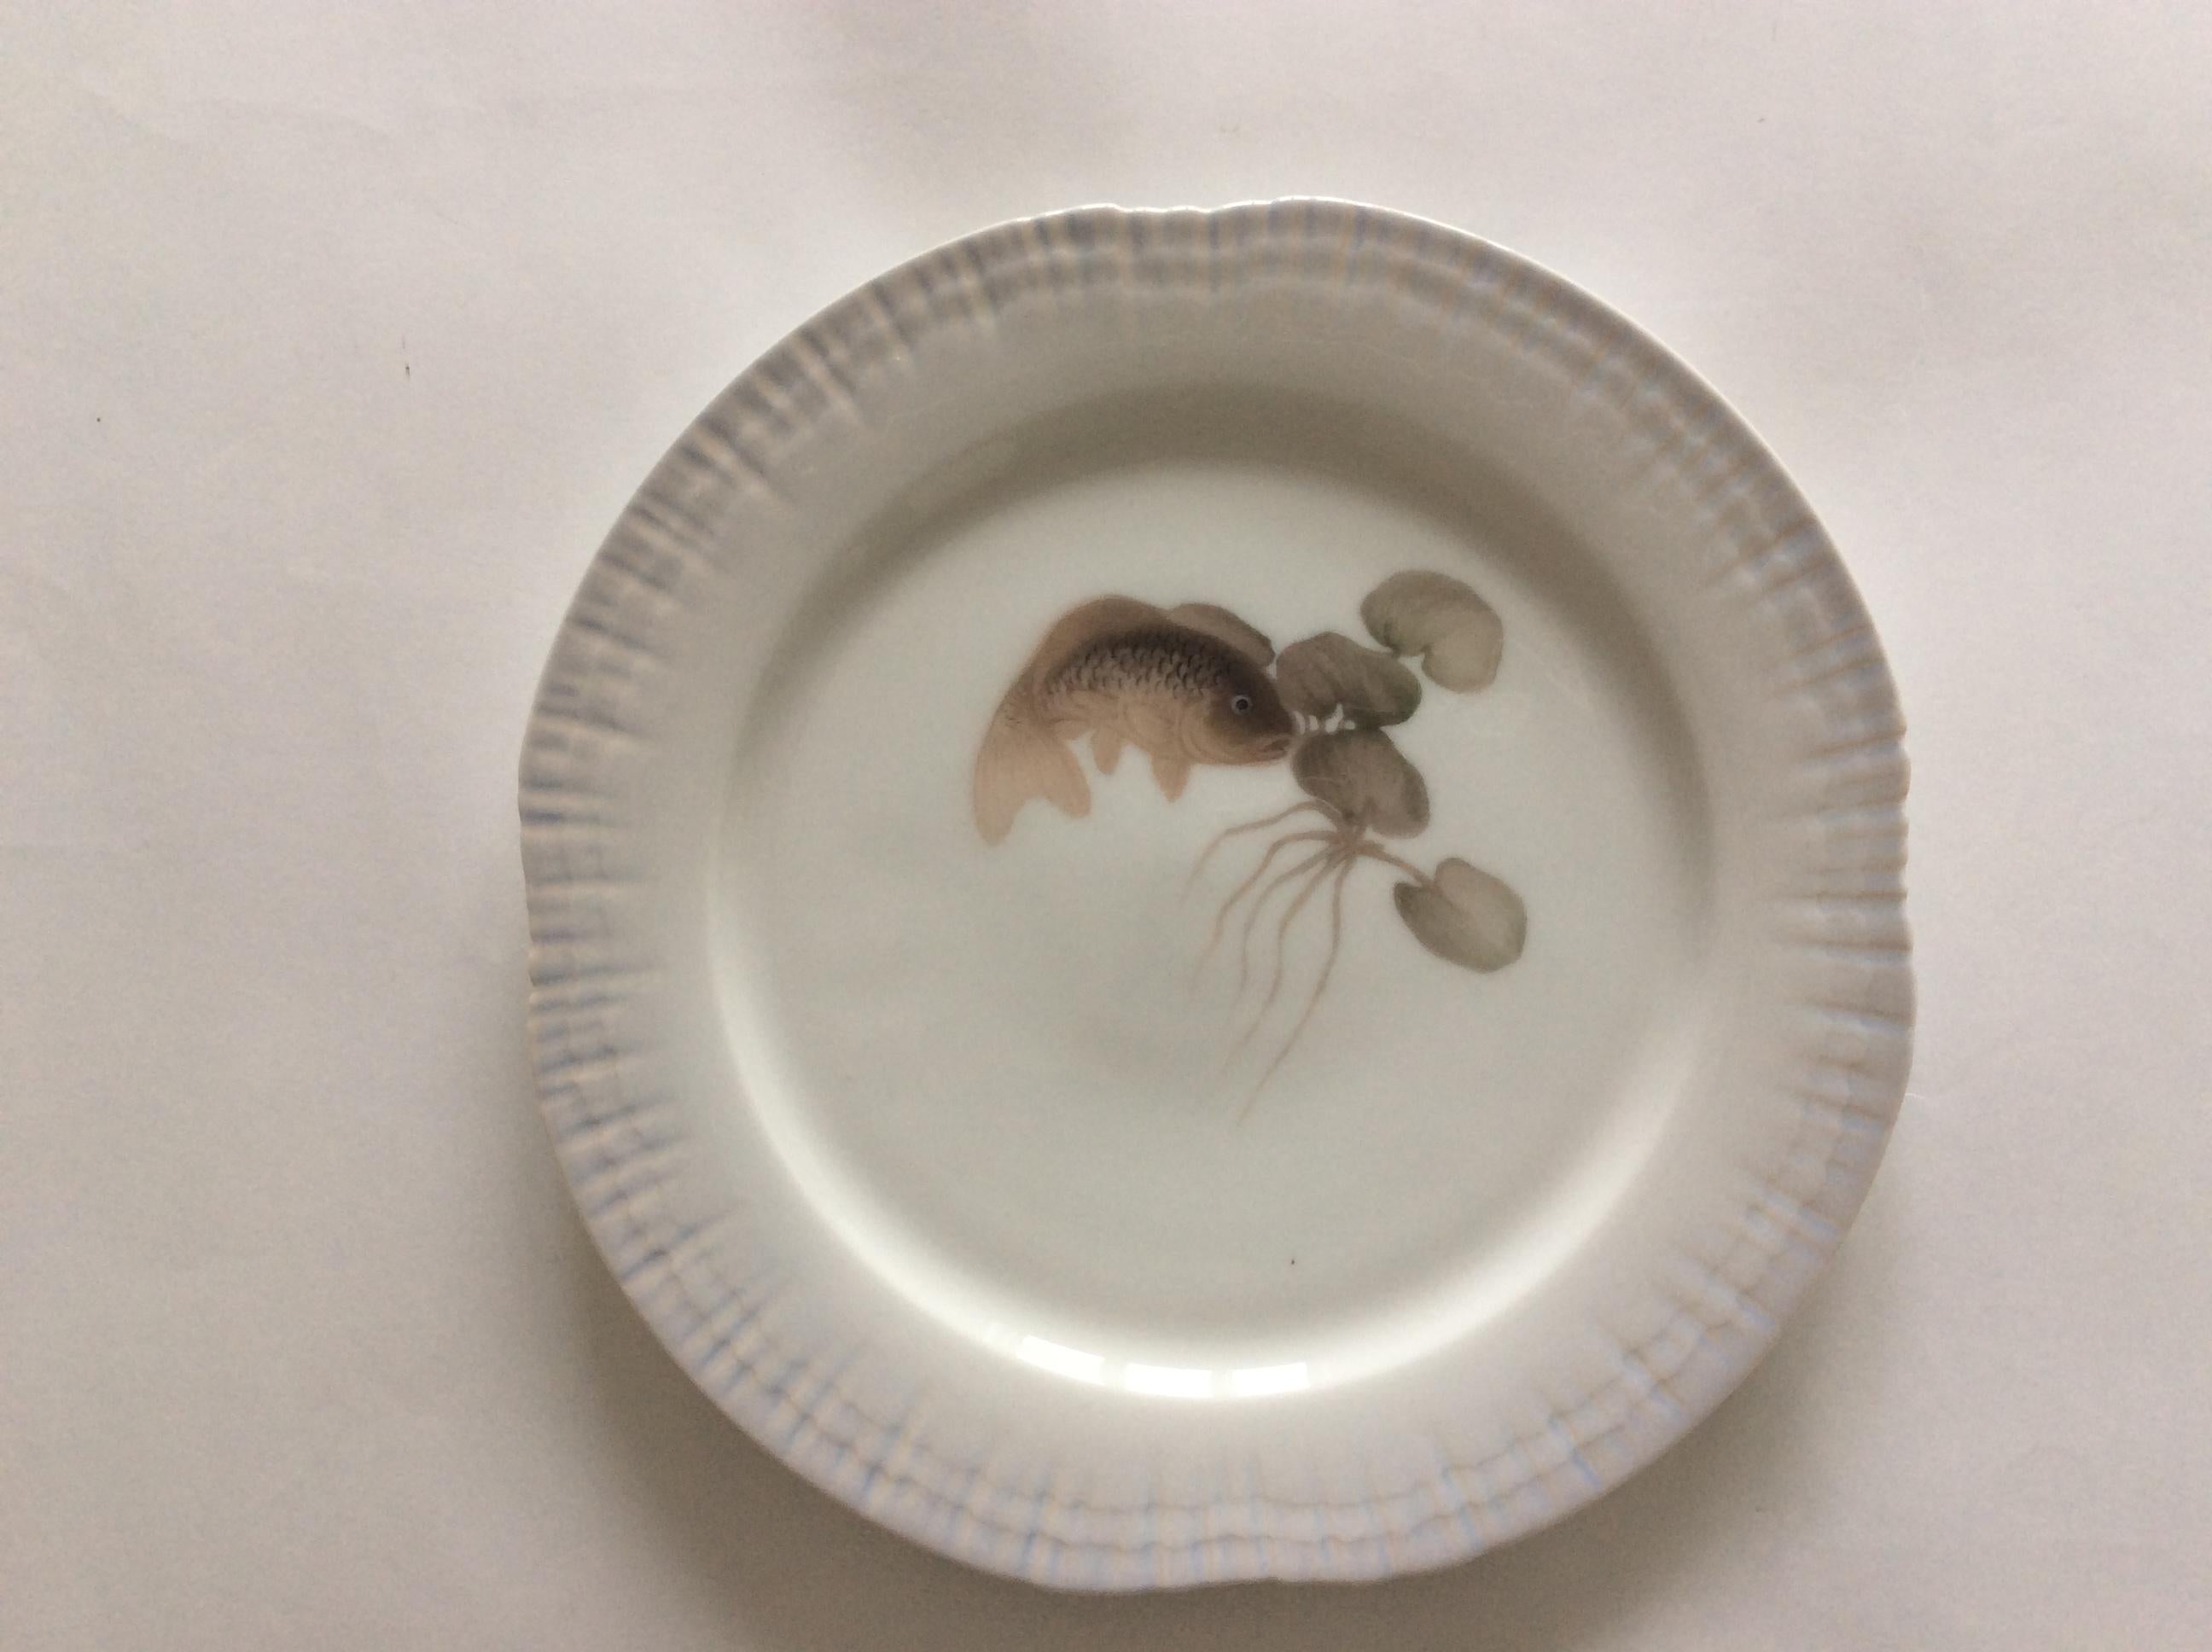 fish plates for sale